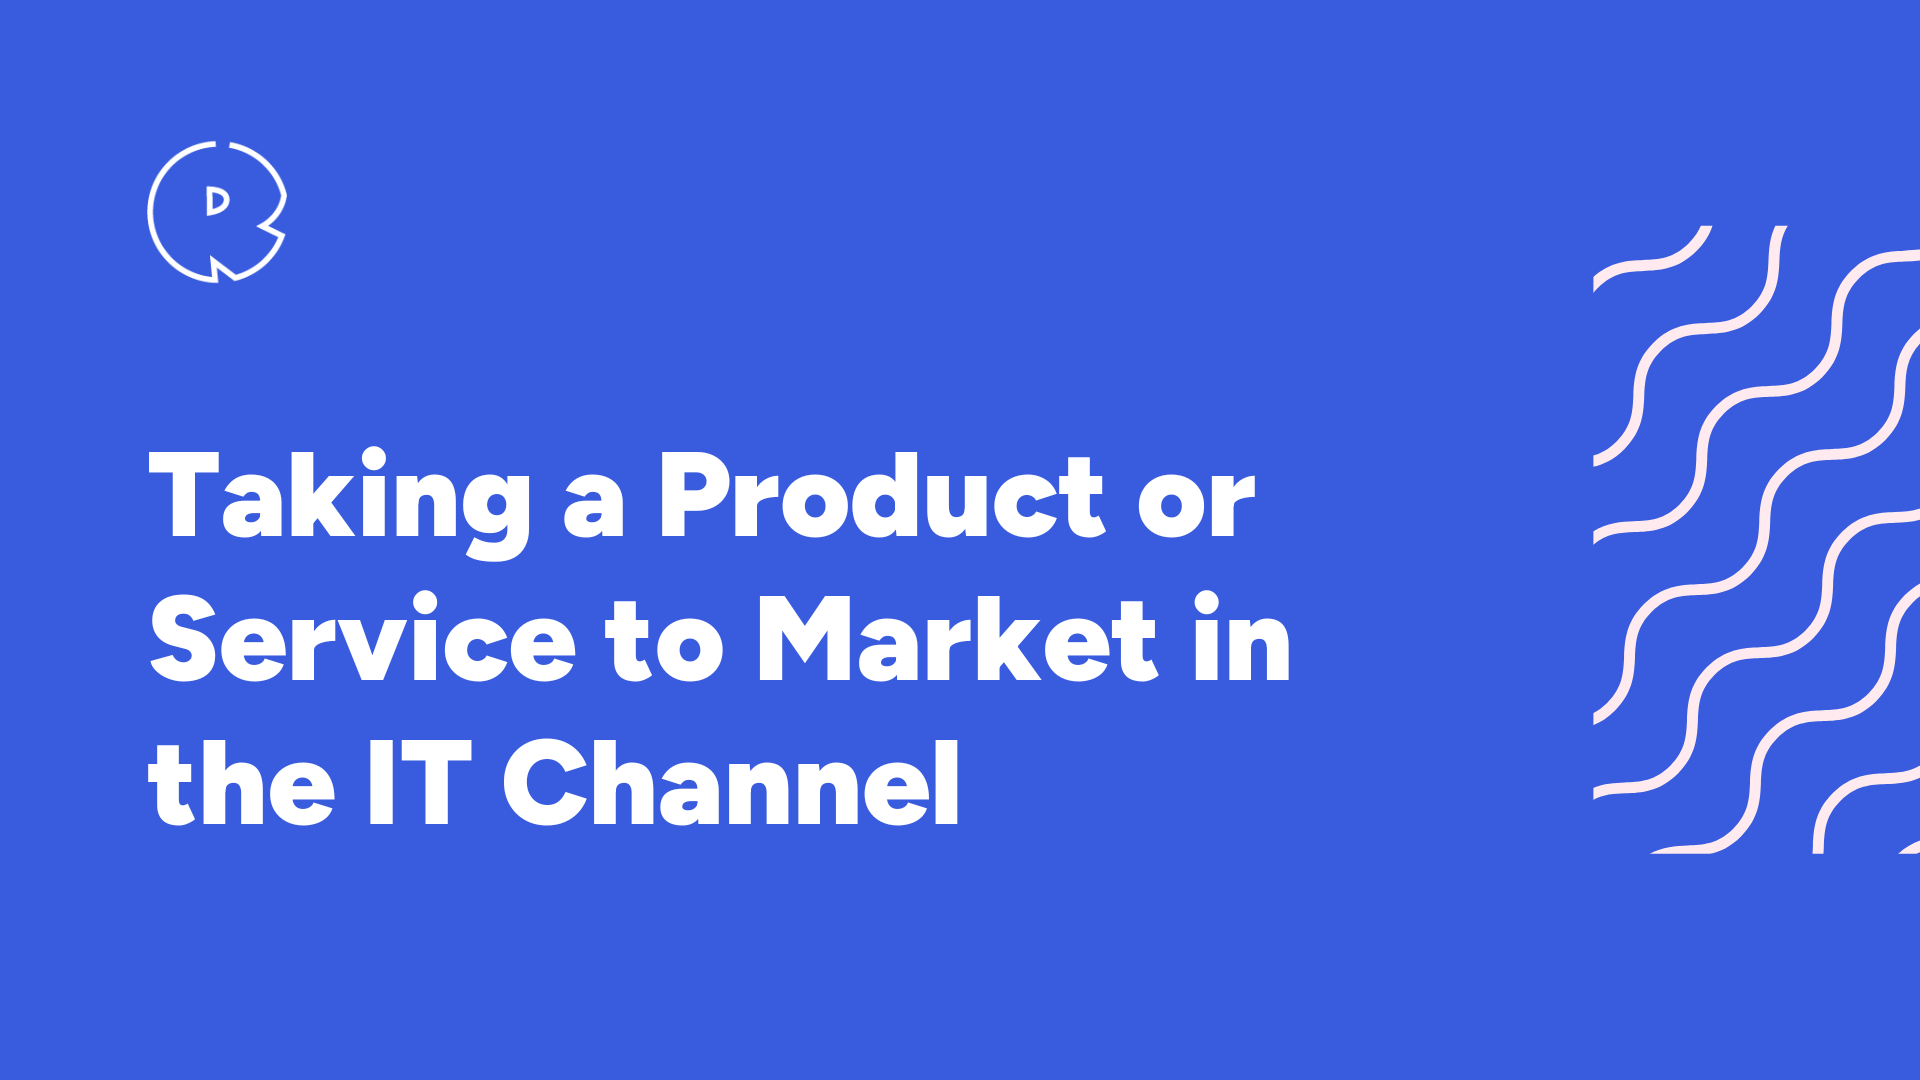 Taking a Product or Service to Market in the IT Channel